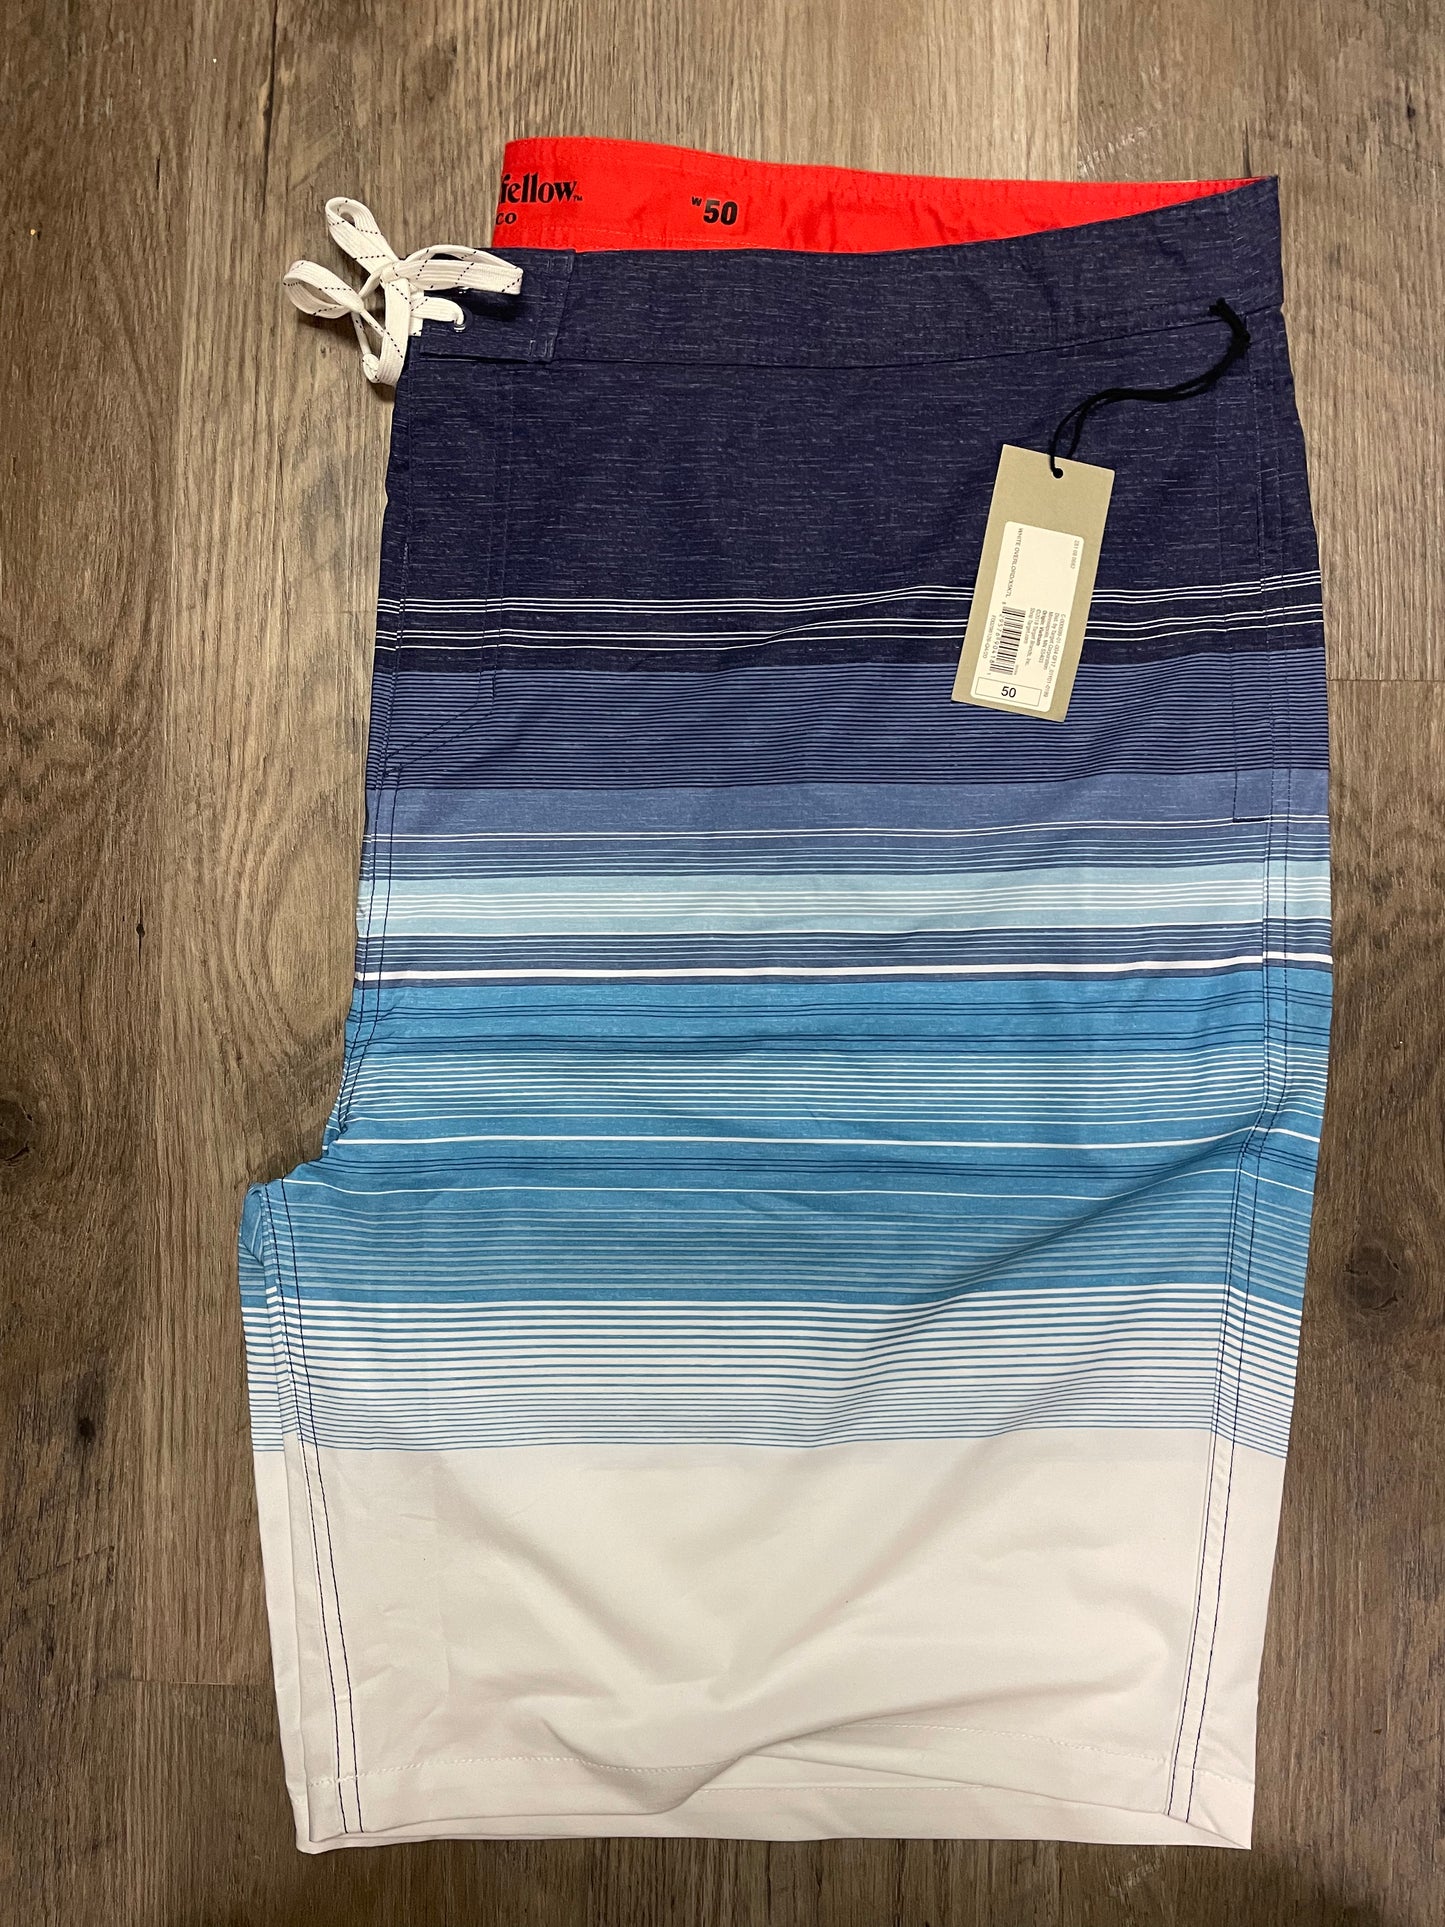 New Men 50W Board shorts Big and tall. Goodfellow co.